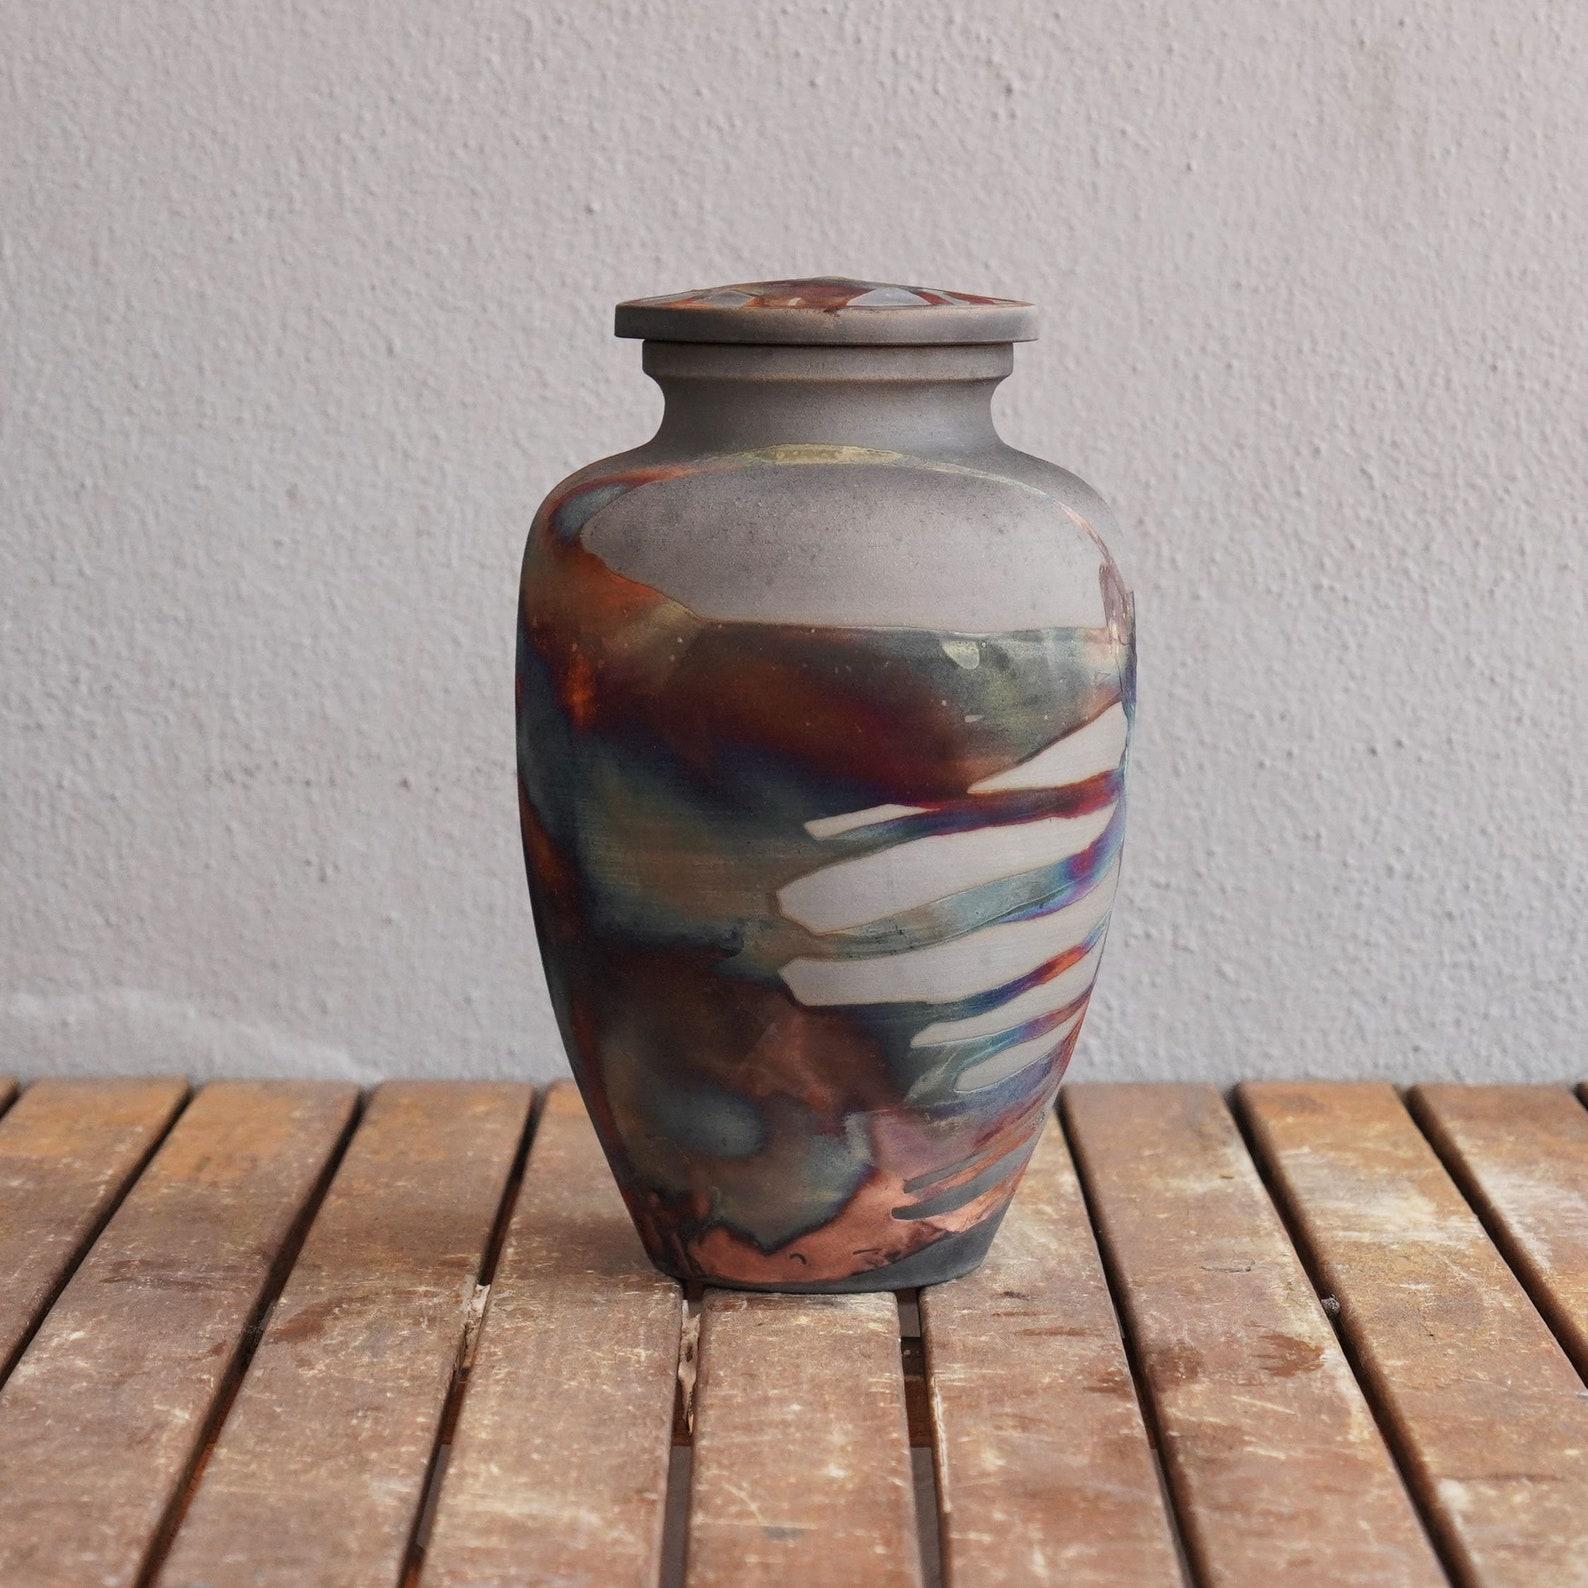 Omoide ~ (思い出) - memories.
 
The passing of a loved one will always be a defining moment in a person's life. The Omoide Urn is a one of a kind ceramic piece that offers a focal point to reminisce on the memories left behind by your loved one.

Each